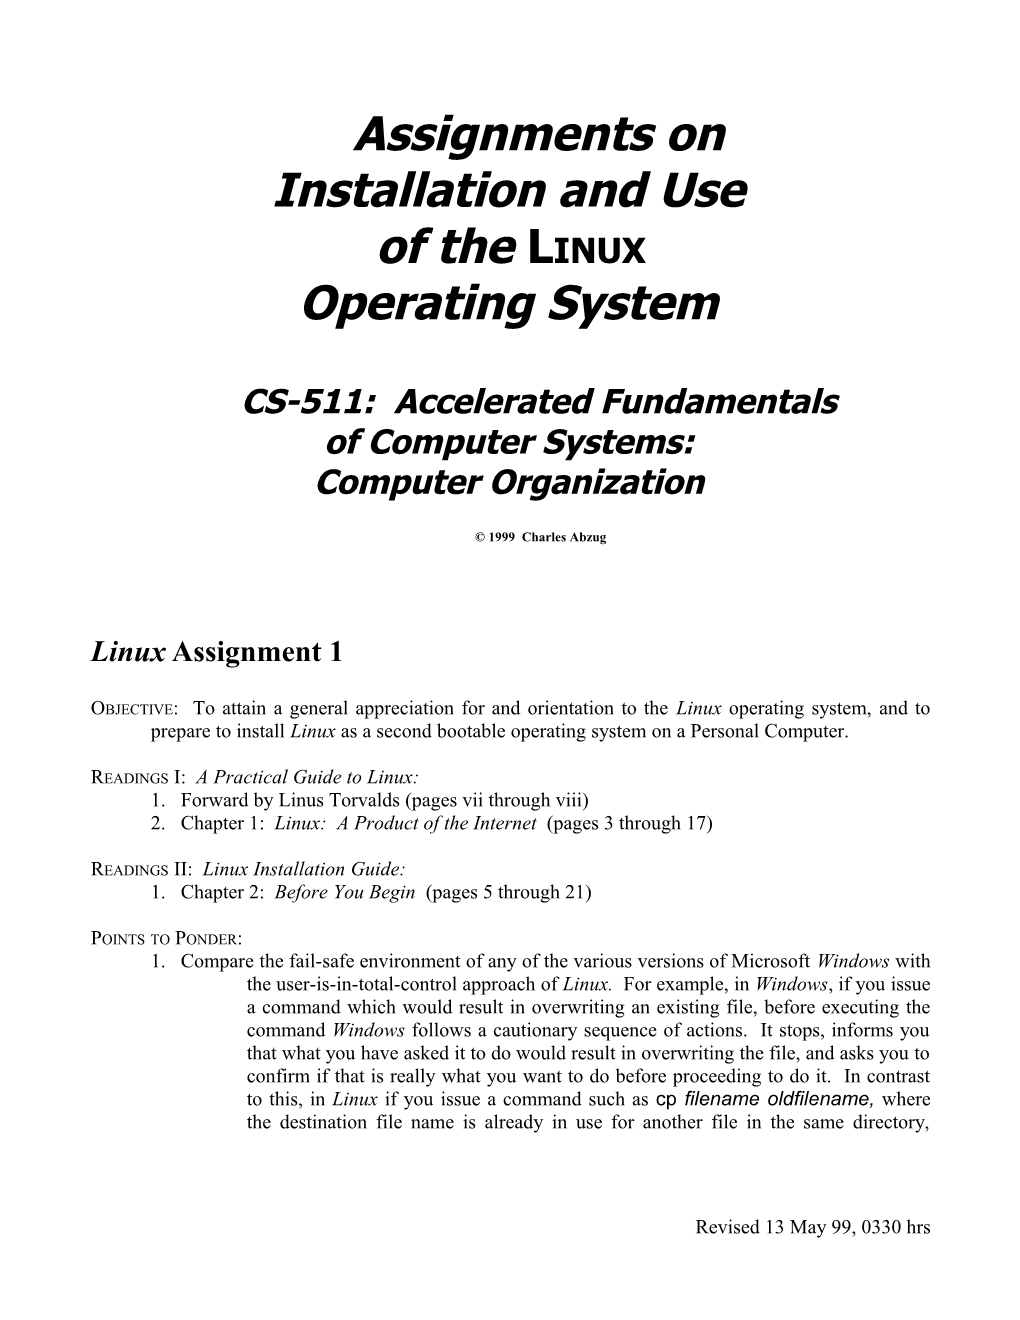 CS-511 Assignments: Installation and Use of the Linux Operating System